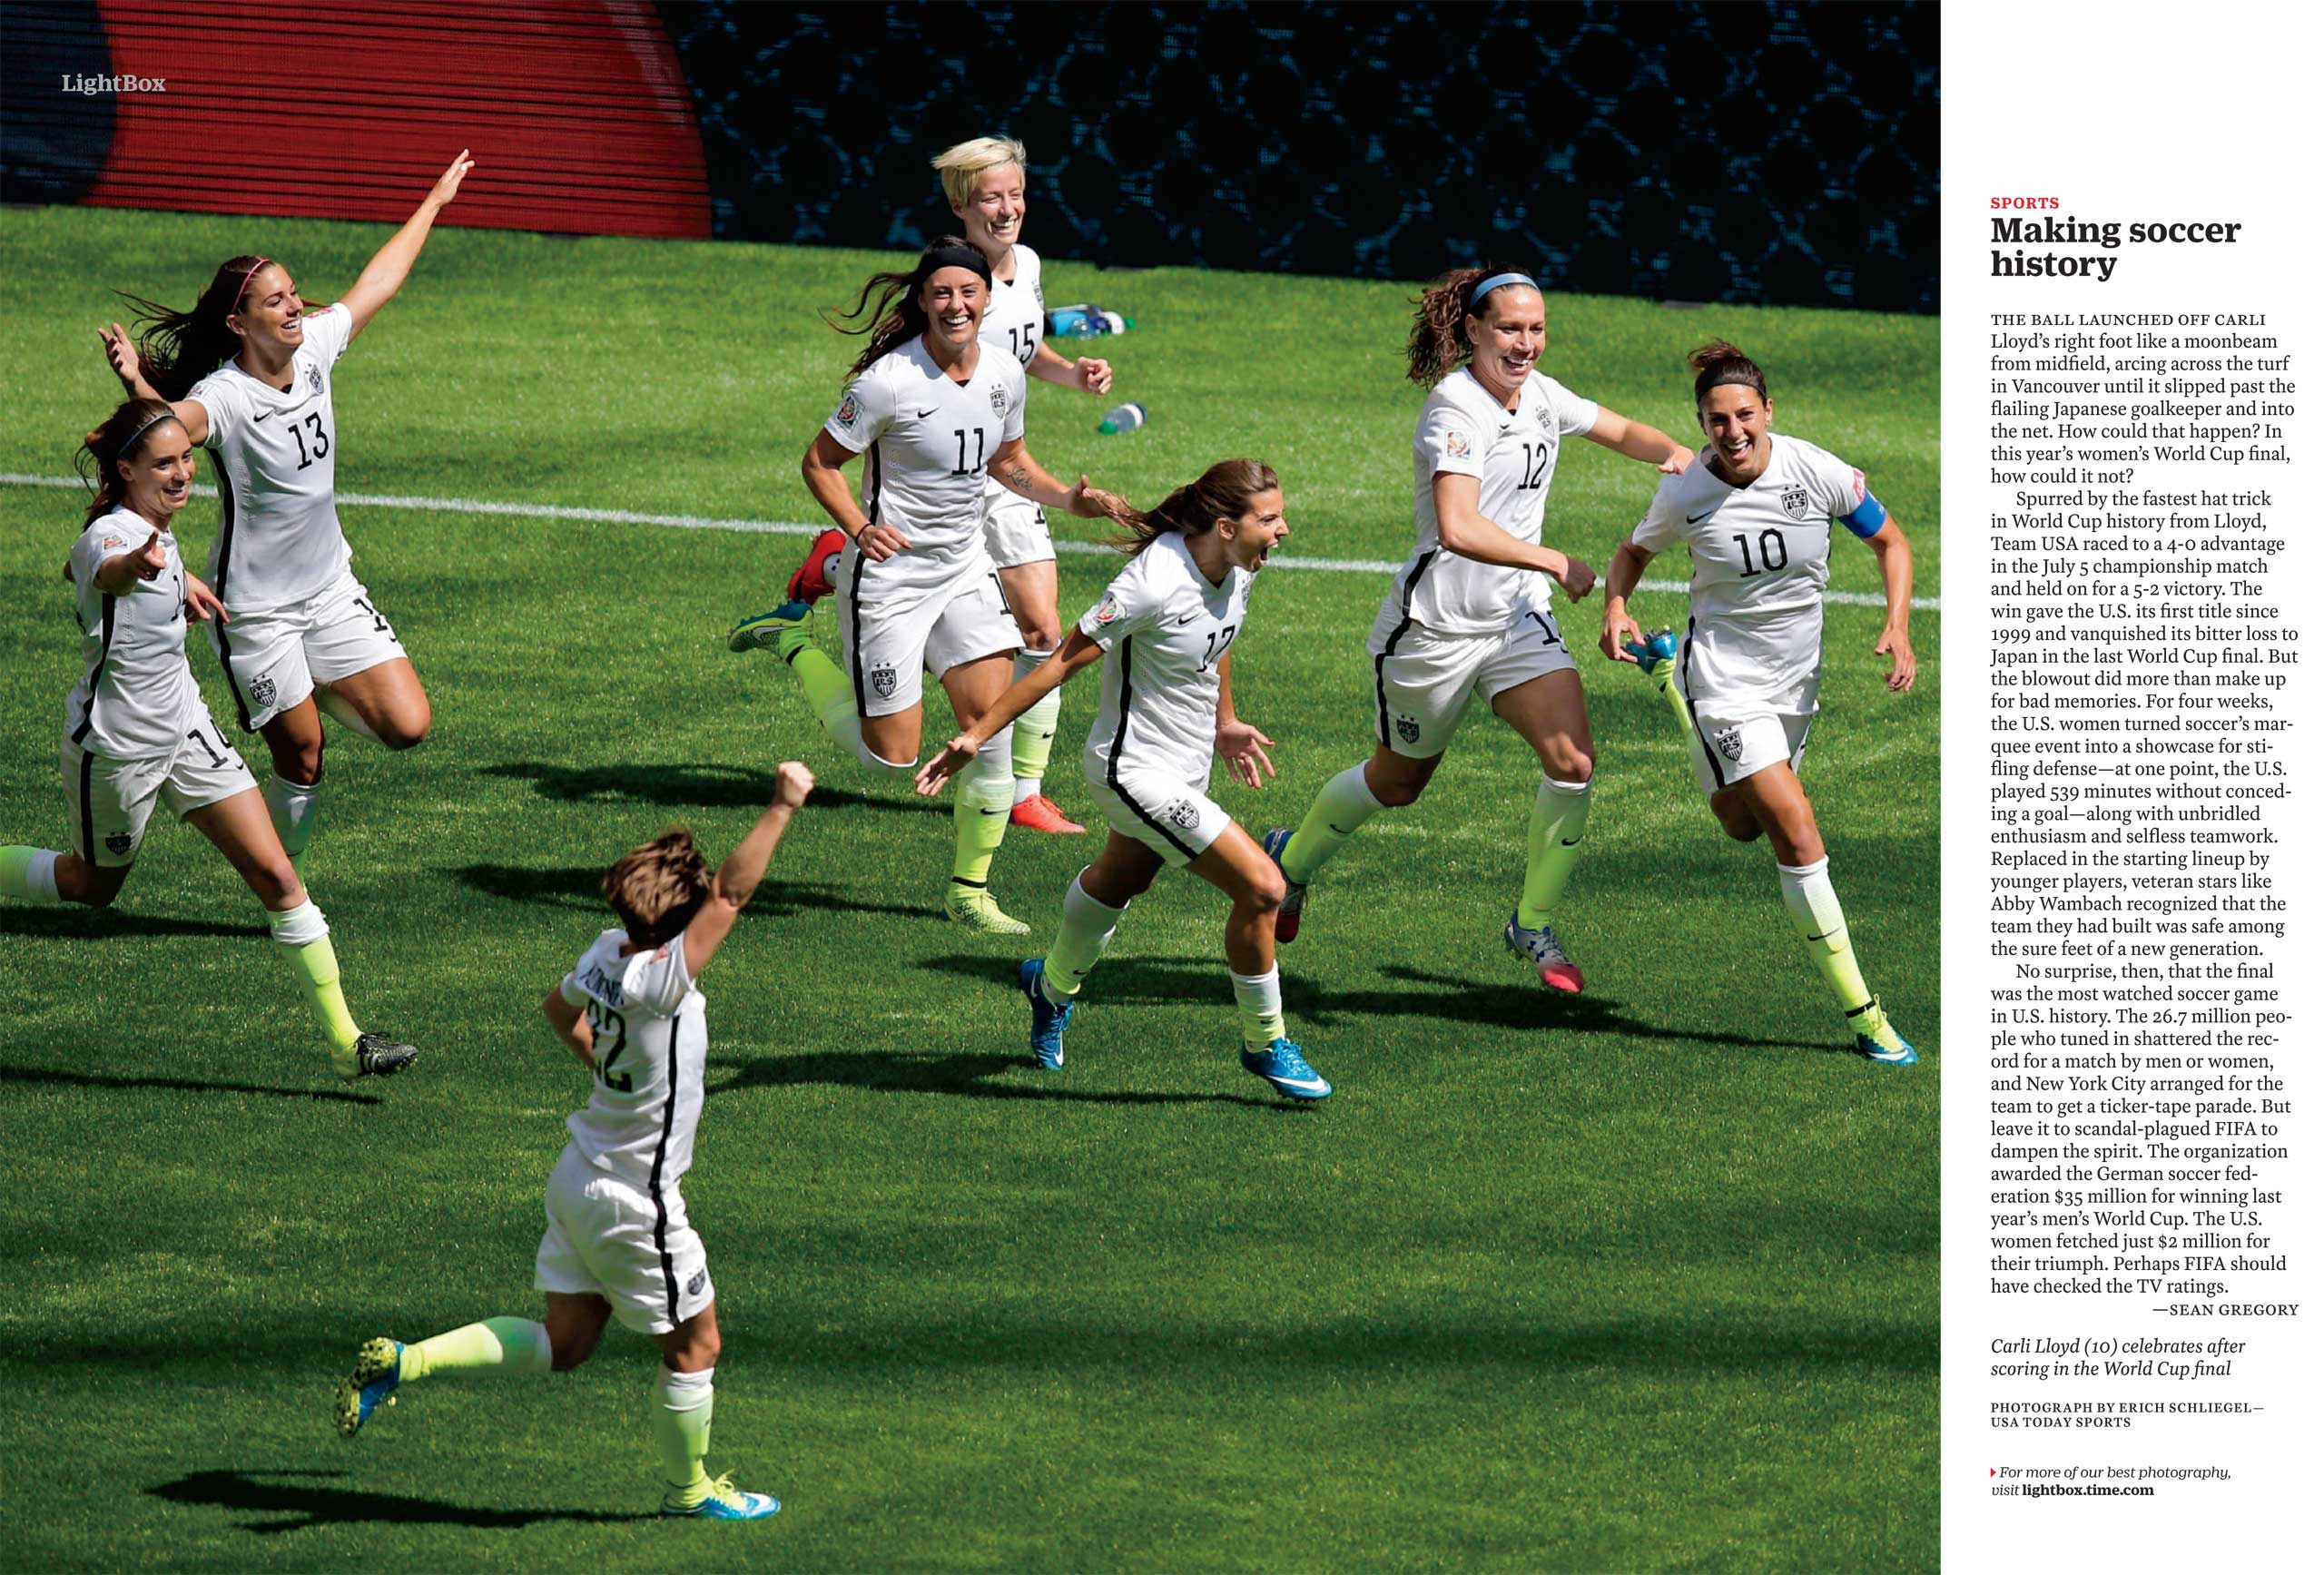 Photograph by Erich Schliegel—USA Today Sports  Carli Lloyd (10) celebrates after scoring in the World Cup final. (TIME issue July 20, 2015)